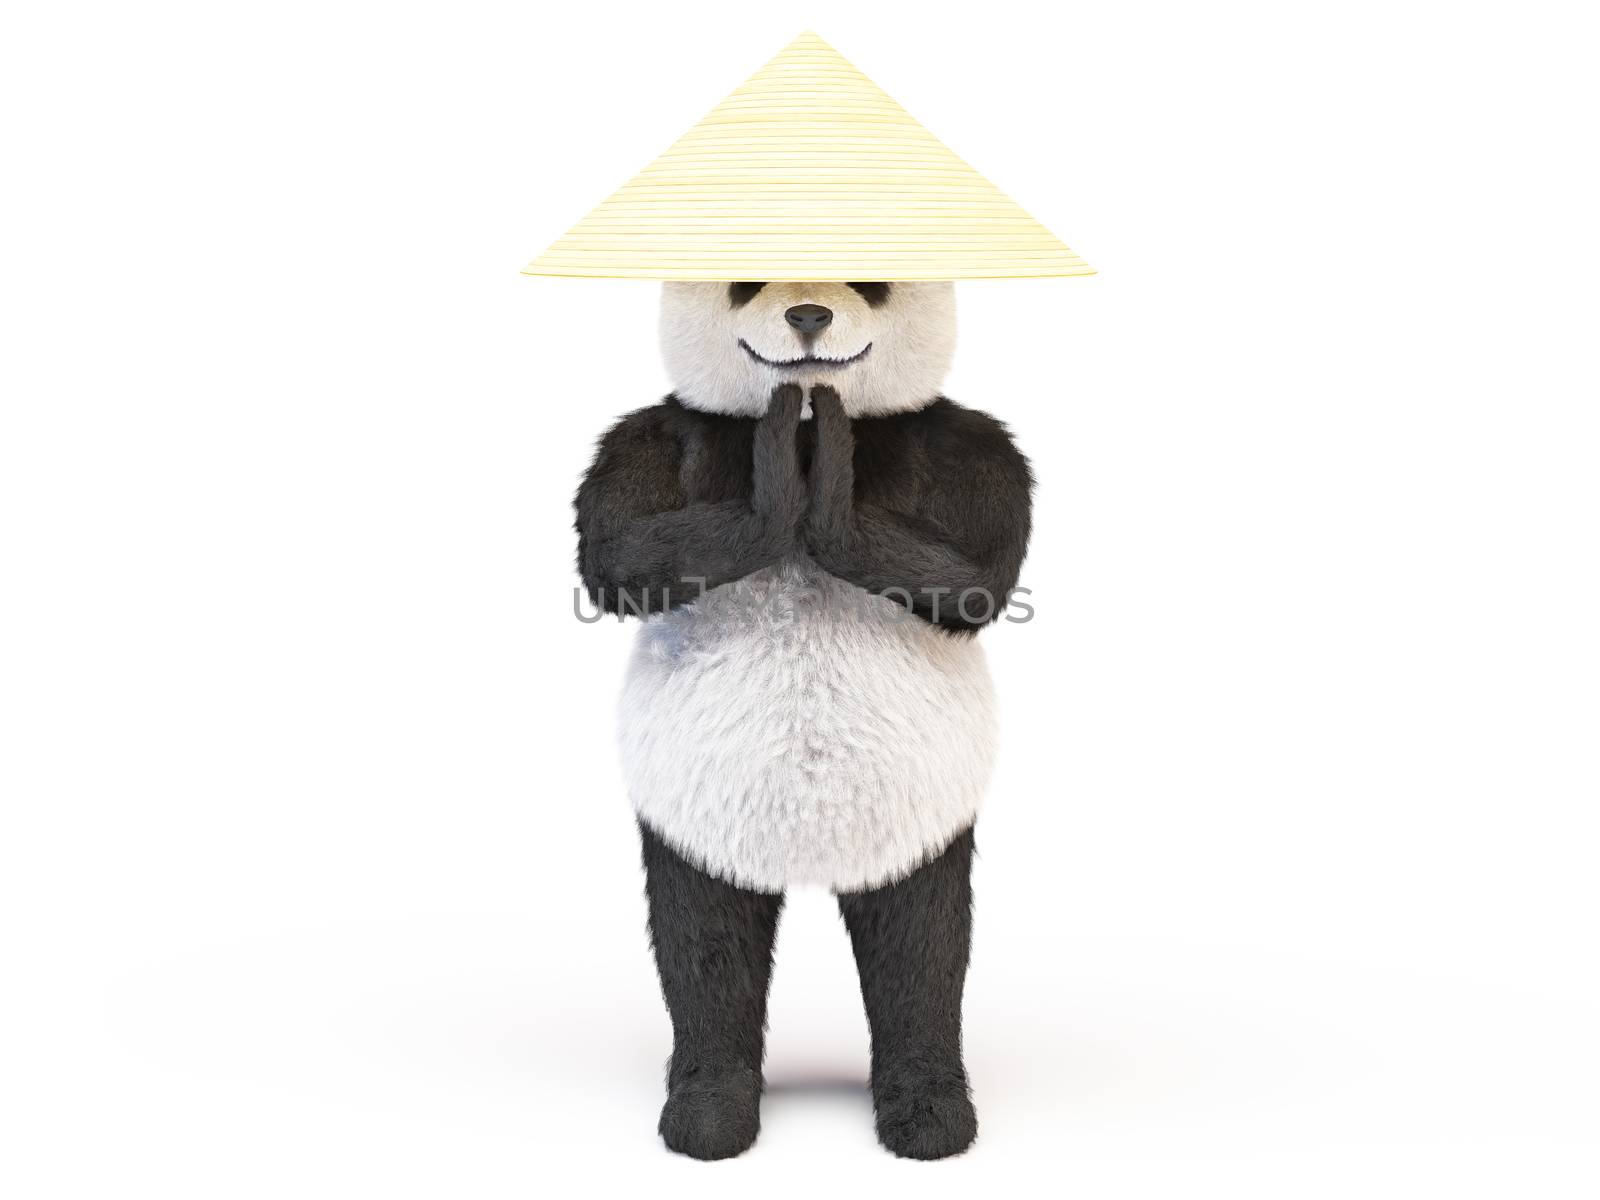 concentrated relaxed kung fu panda asian straw hat standing respectful namaste posture clasped hands greeting. animal engaged Chinese martial arts in hat collector rice. Illustration about cute bear